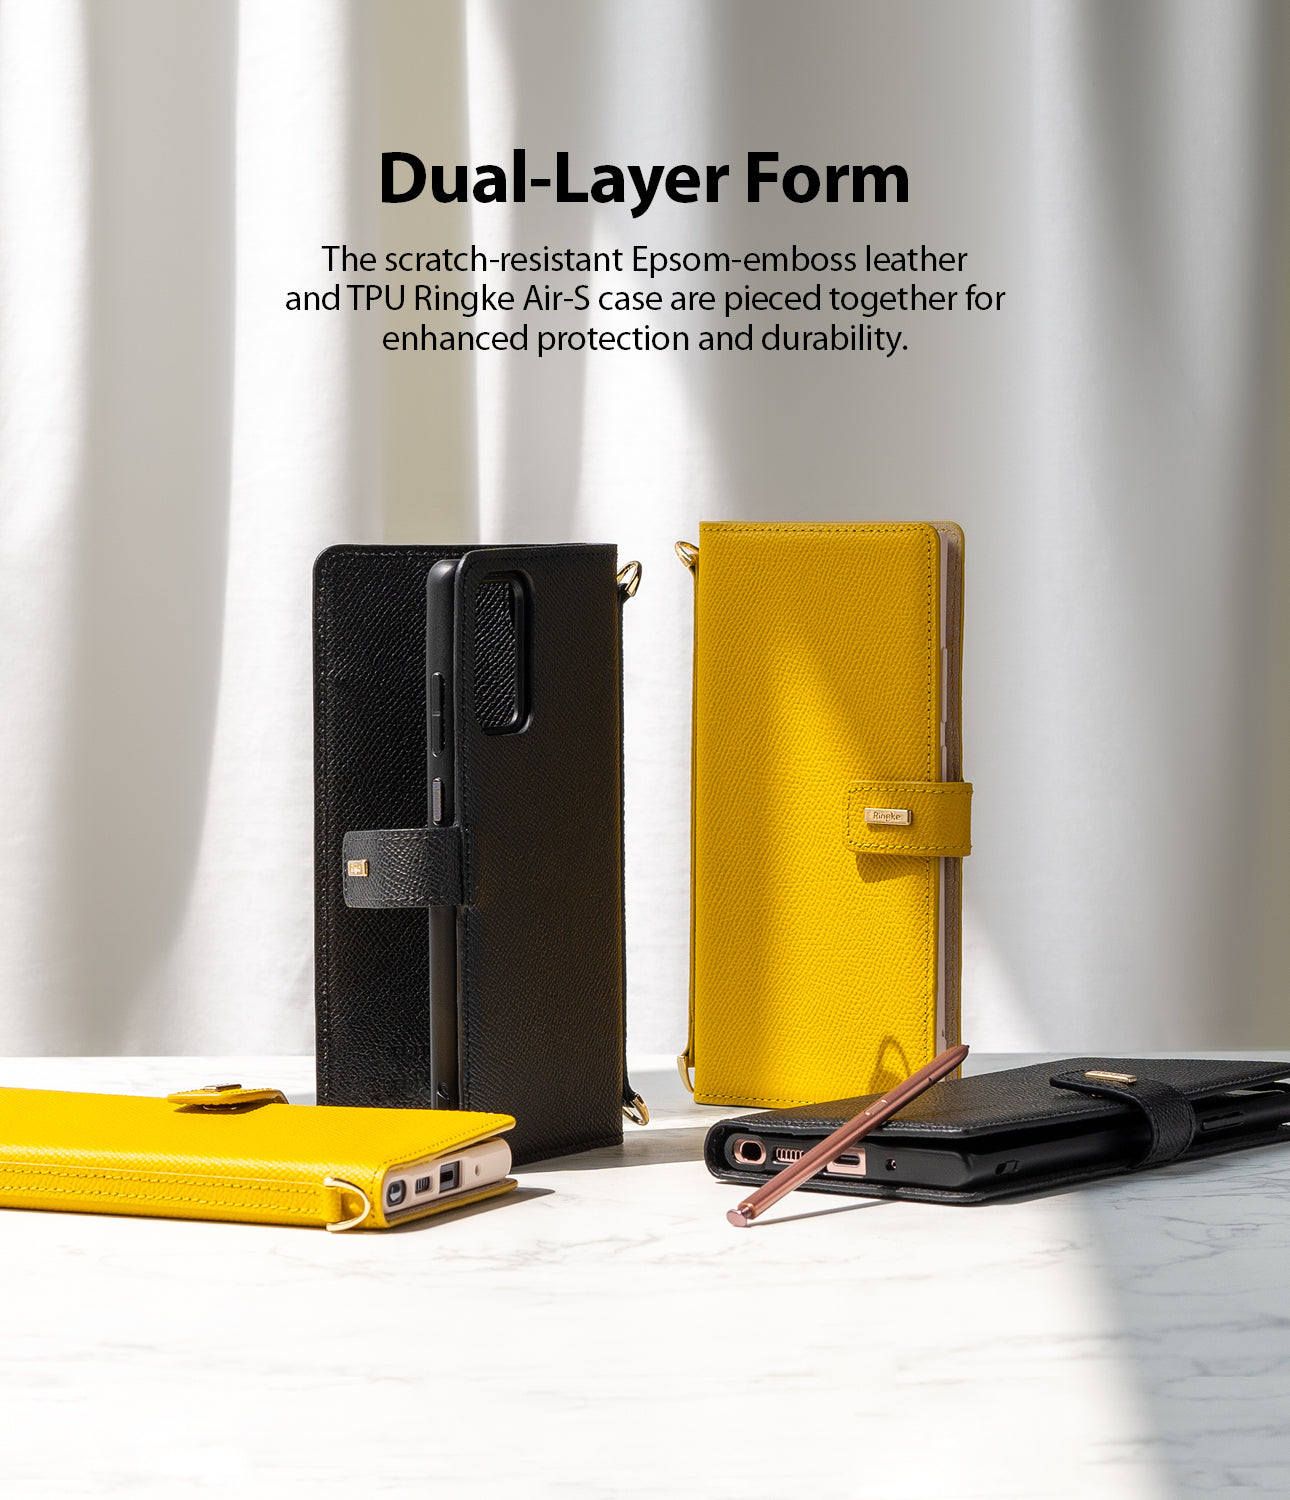 dual-layer form - the scratch-resistant Epsom-emboss leather and TPU ringek Air-S case are pieced together for enhanced protection and durability